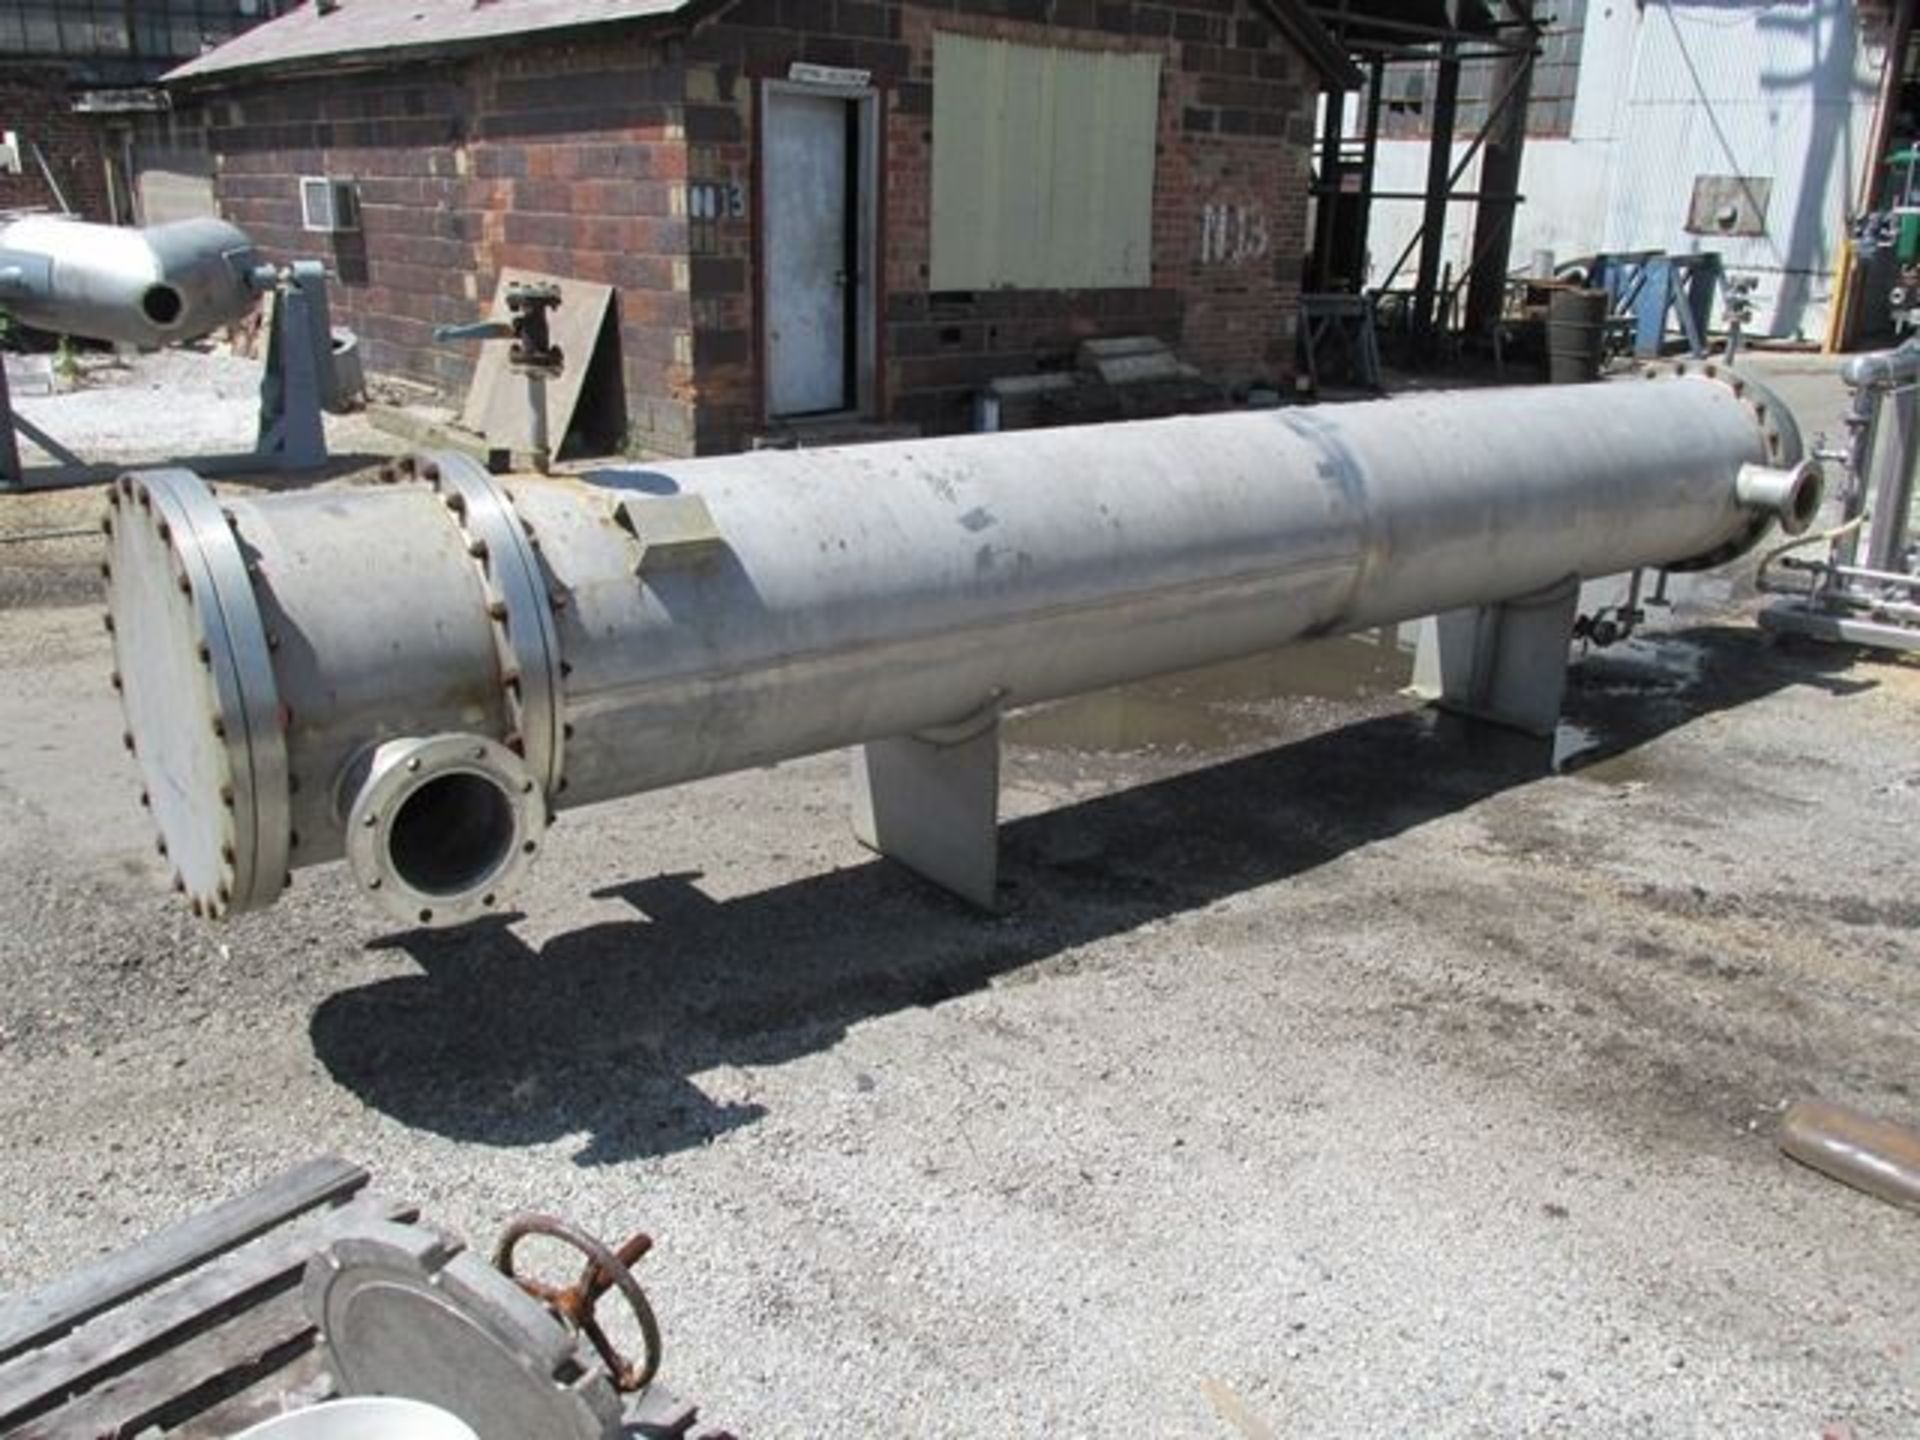 1424 sq ft Doyle & Roth shell and tube heat exchanger, 304 stainless steel.